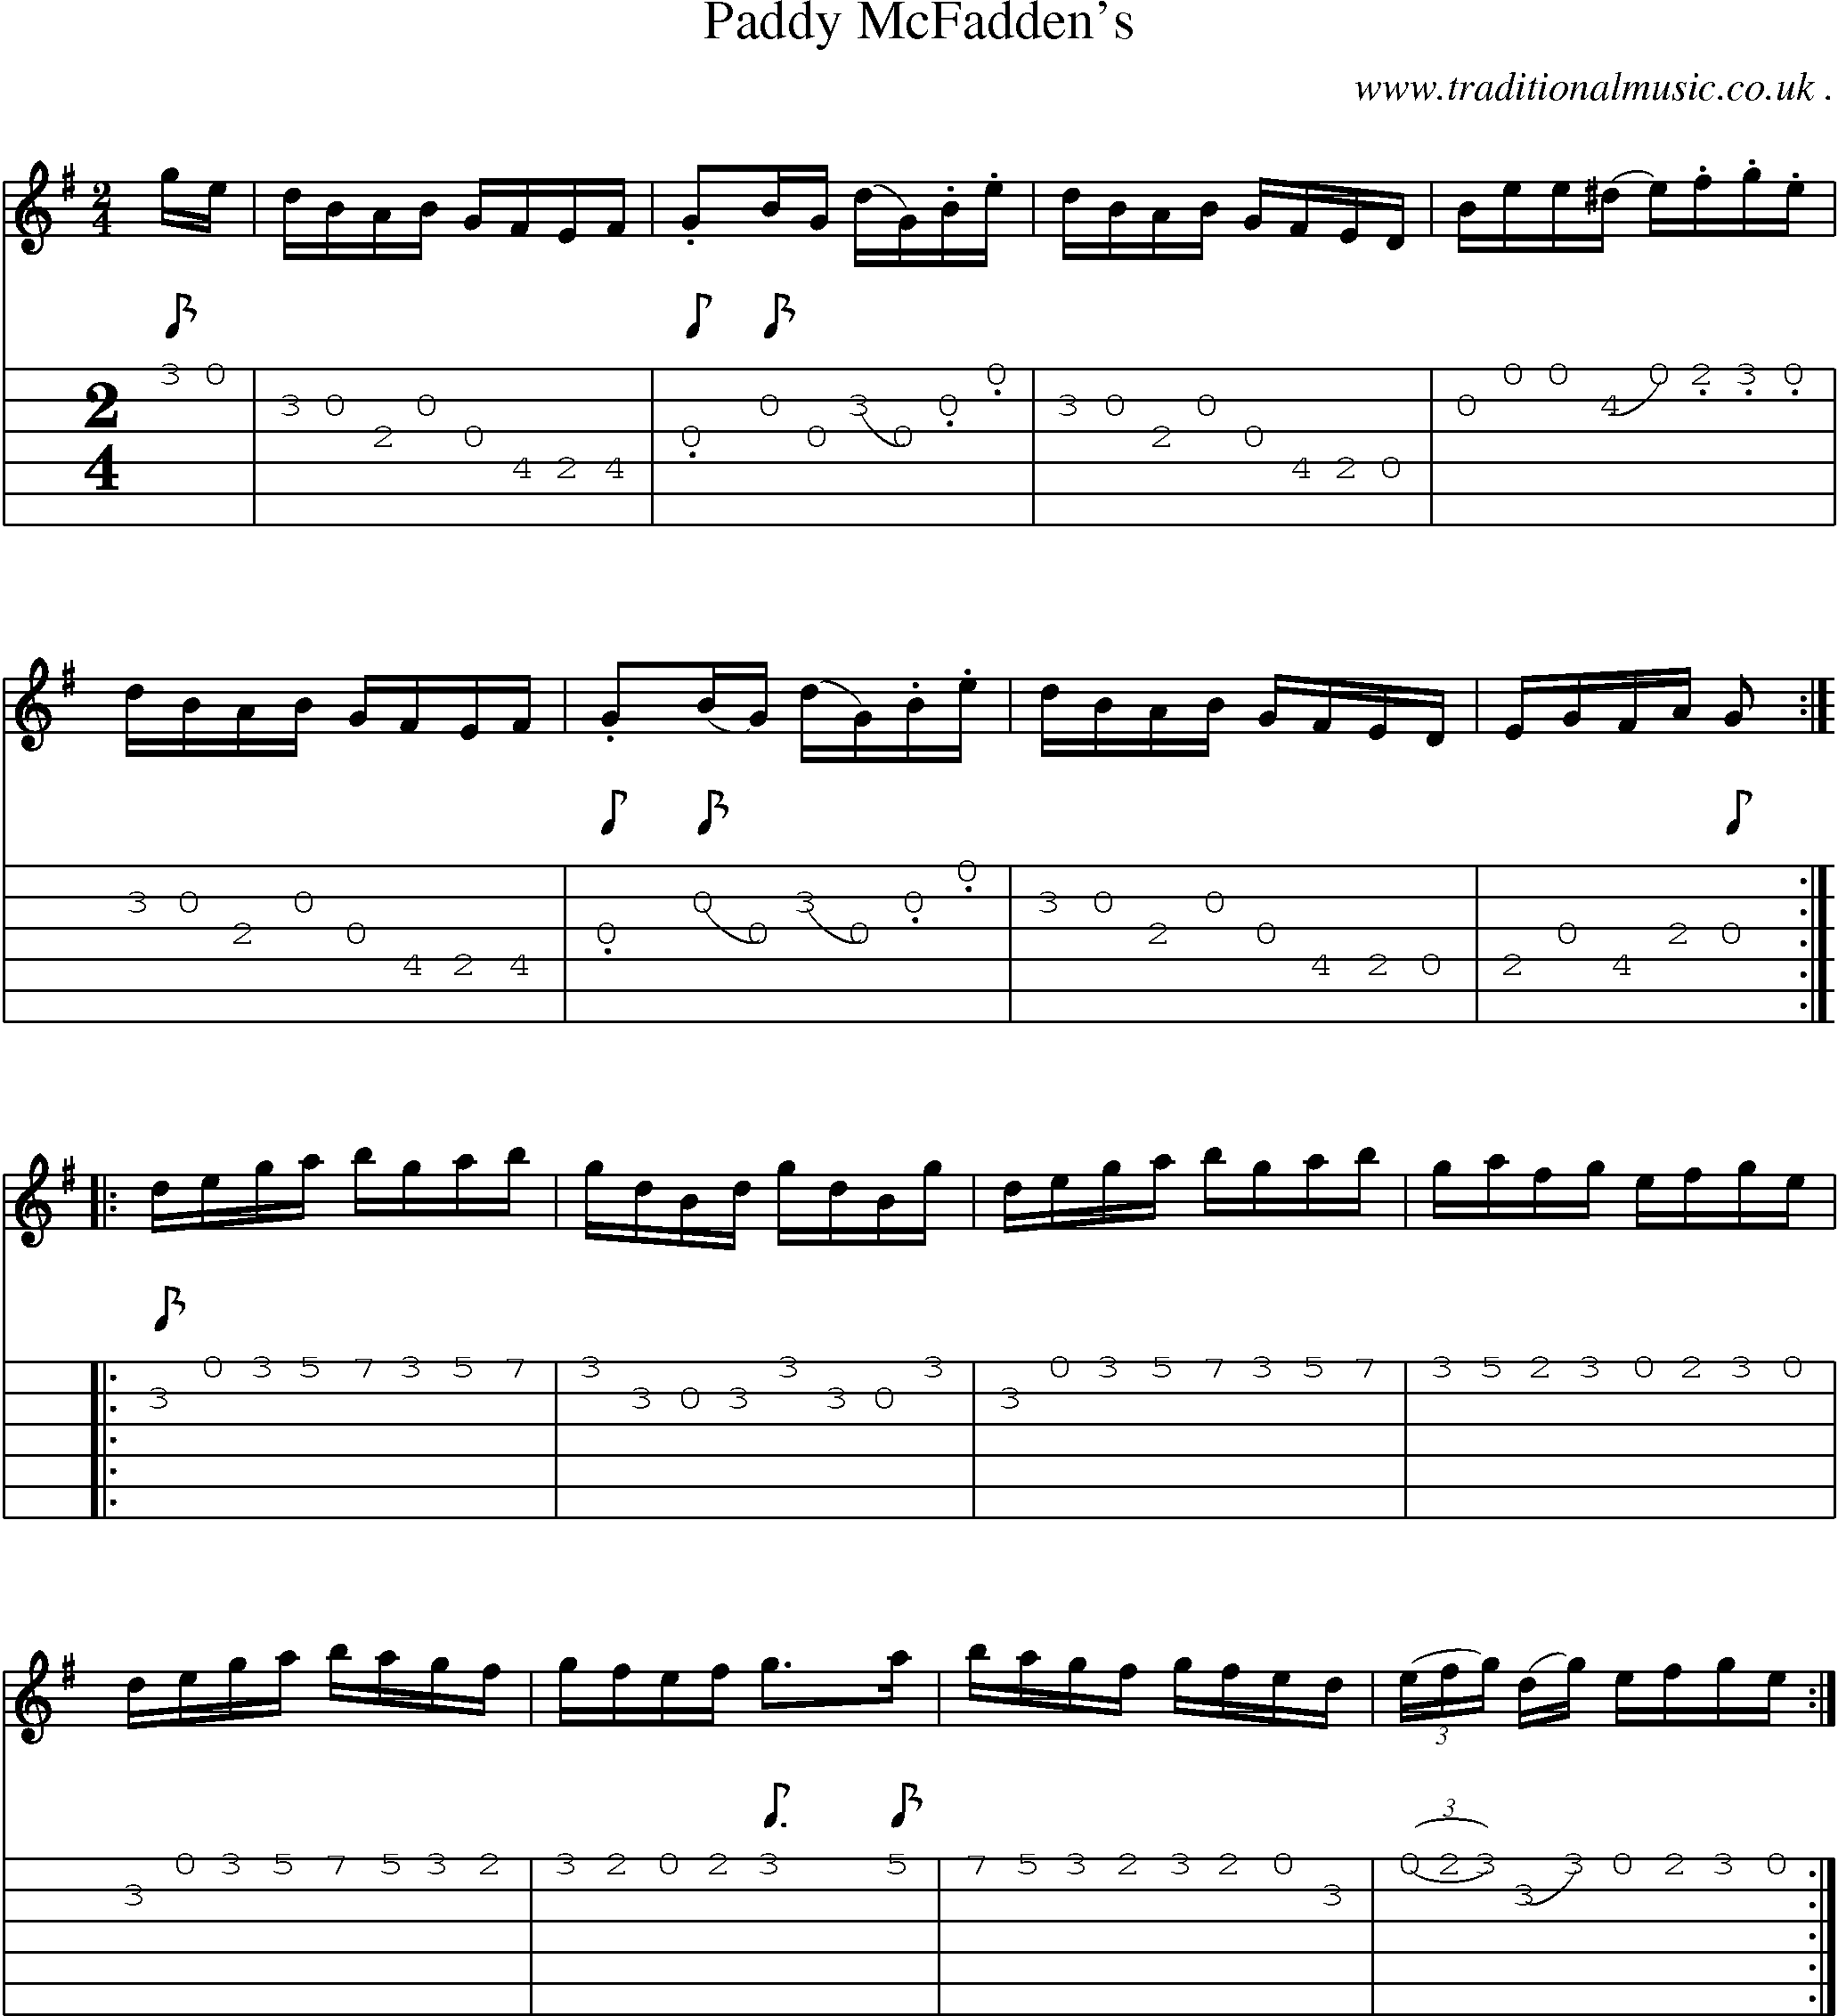 Sheet-Music and Guitar Tabs for Paddy Mcfaddens